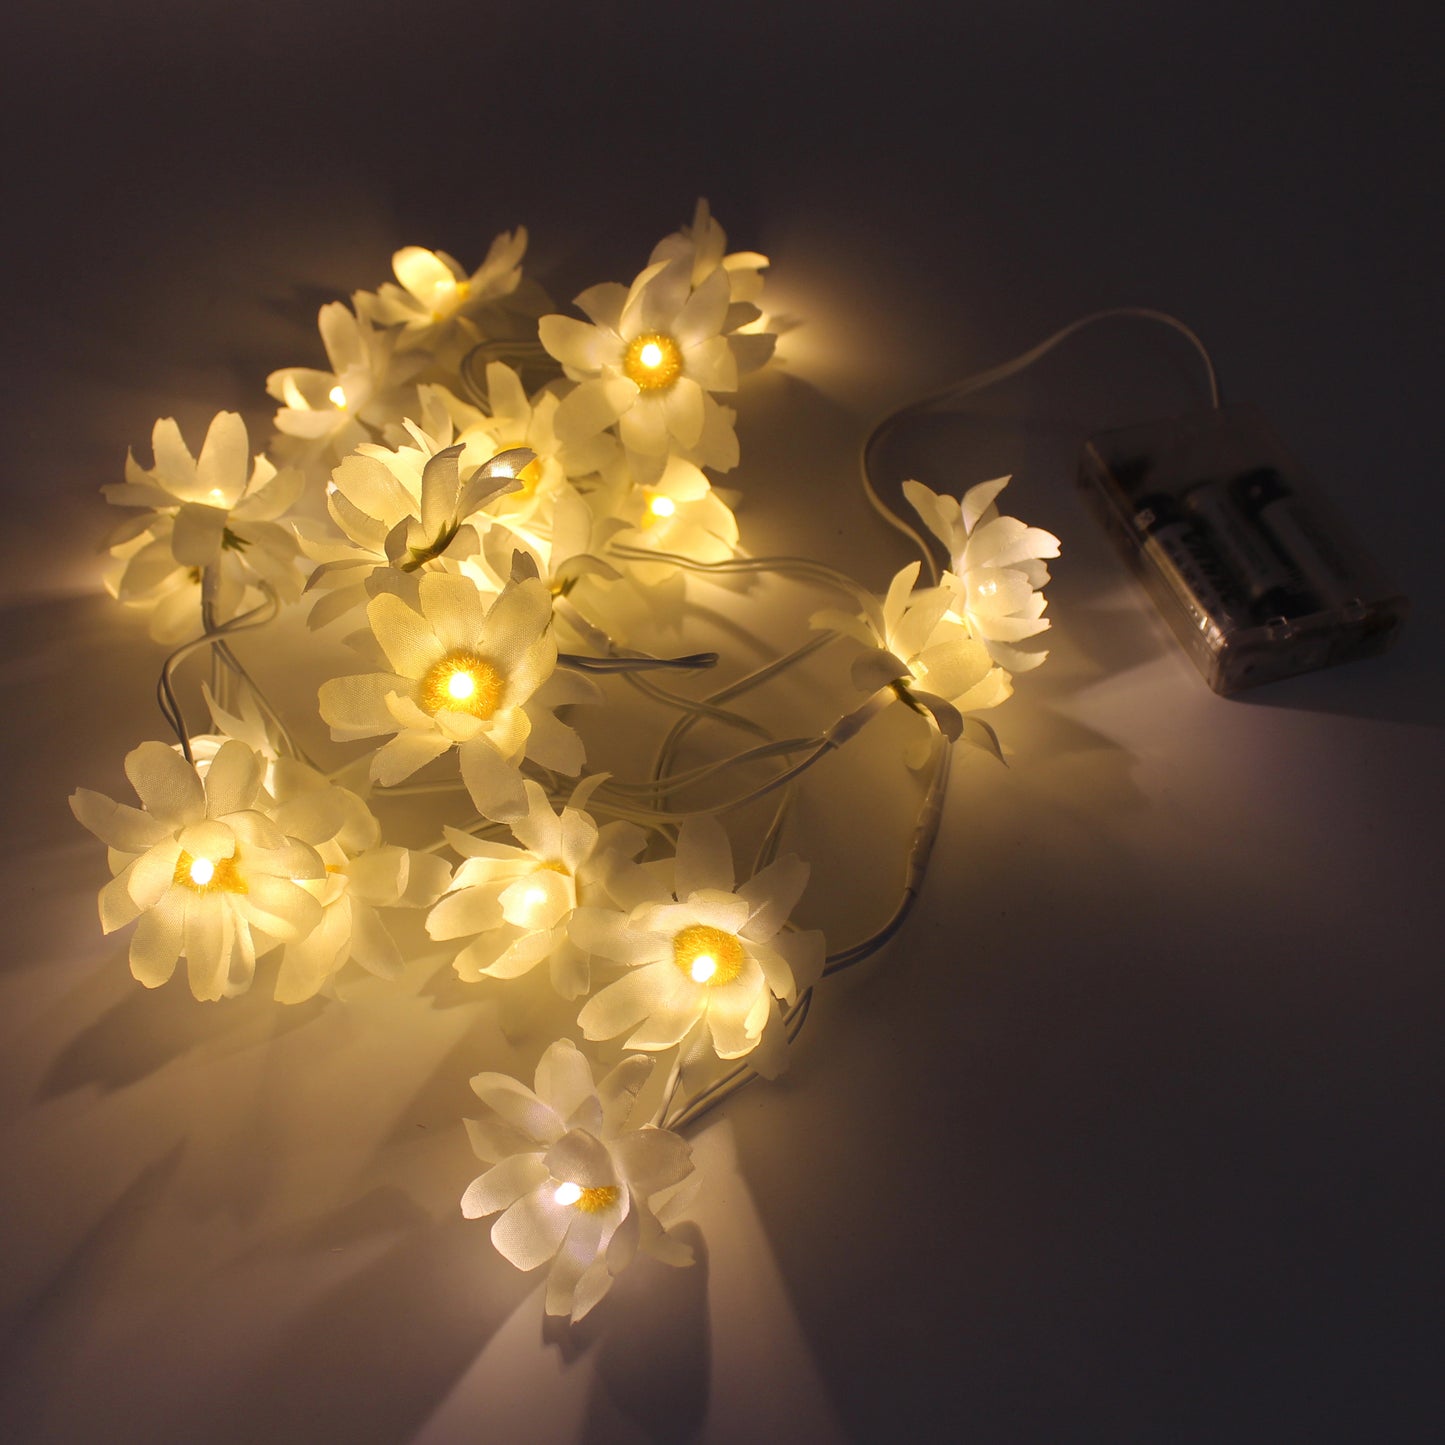 CVHOMEDECO. Daisy String Lights Artificial Silk Flowers Battery Powered Fairy Starry Lights for Wedding Birthday Party and Holiday Seasonal Décor, 8 ft/20 LEDs